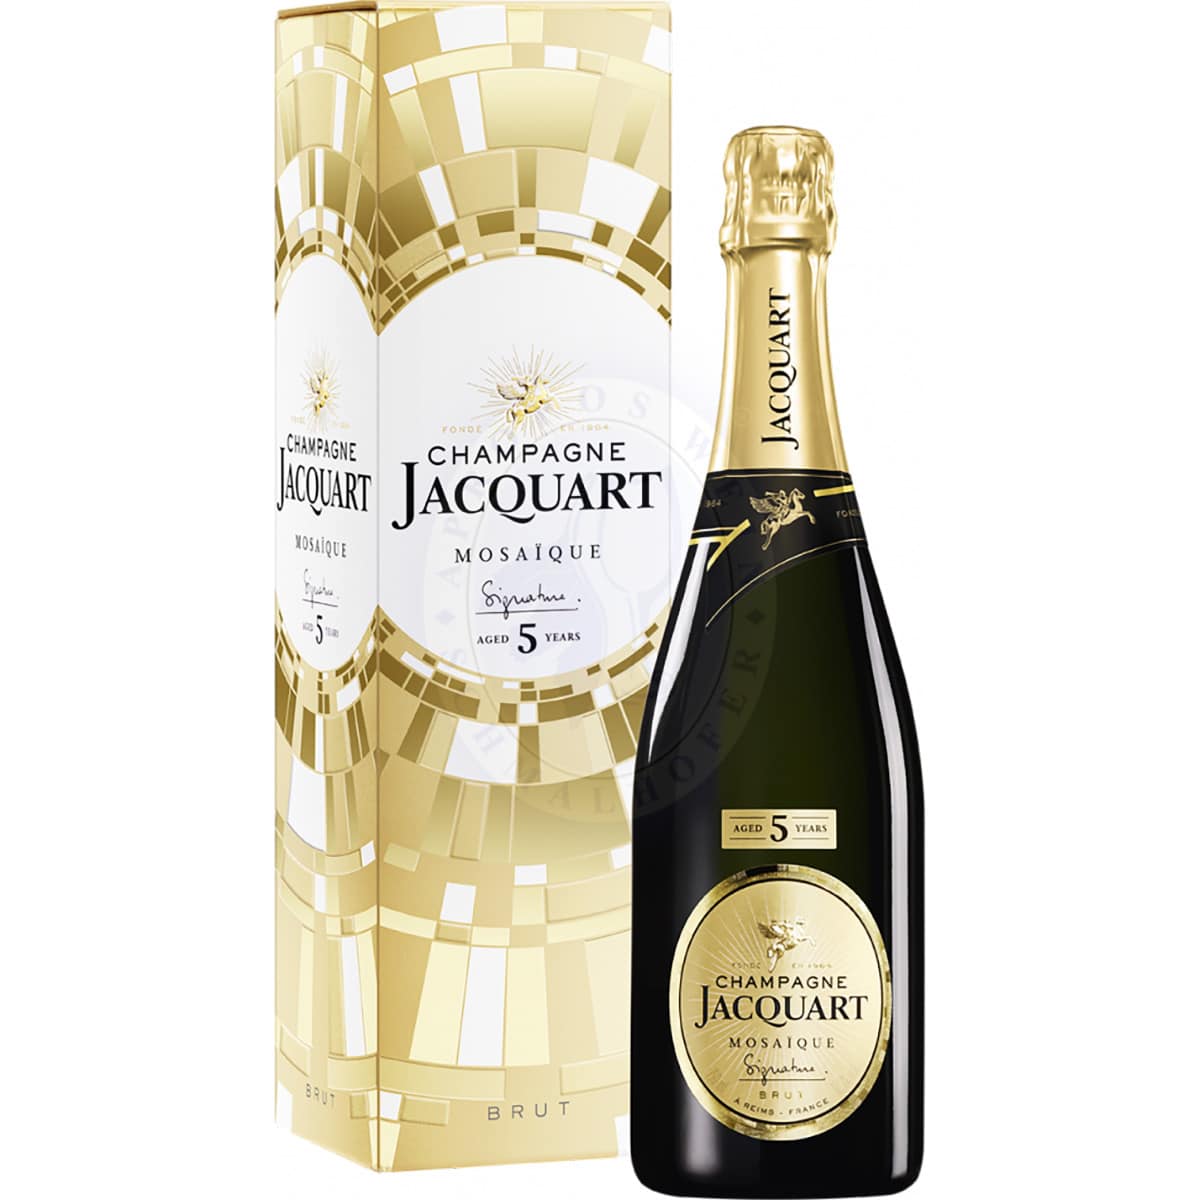 Champagner wein.plus on | Find+Buy special occasions